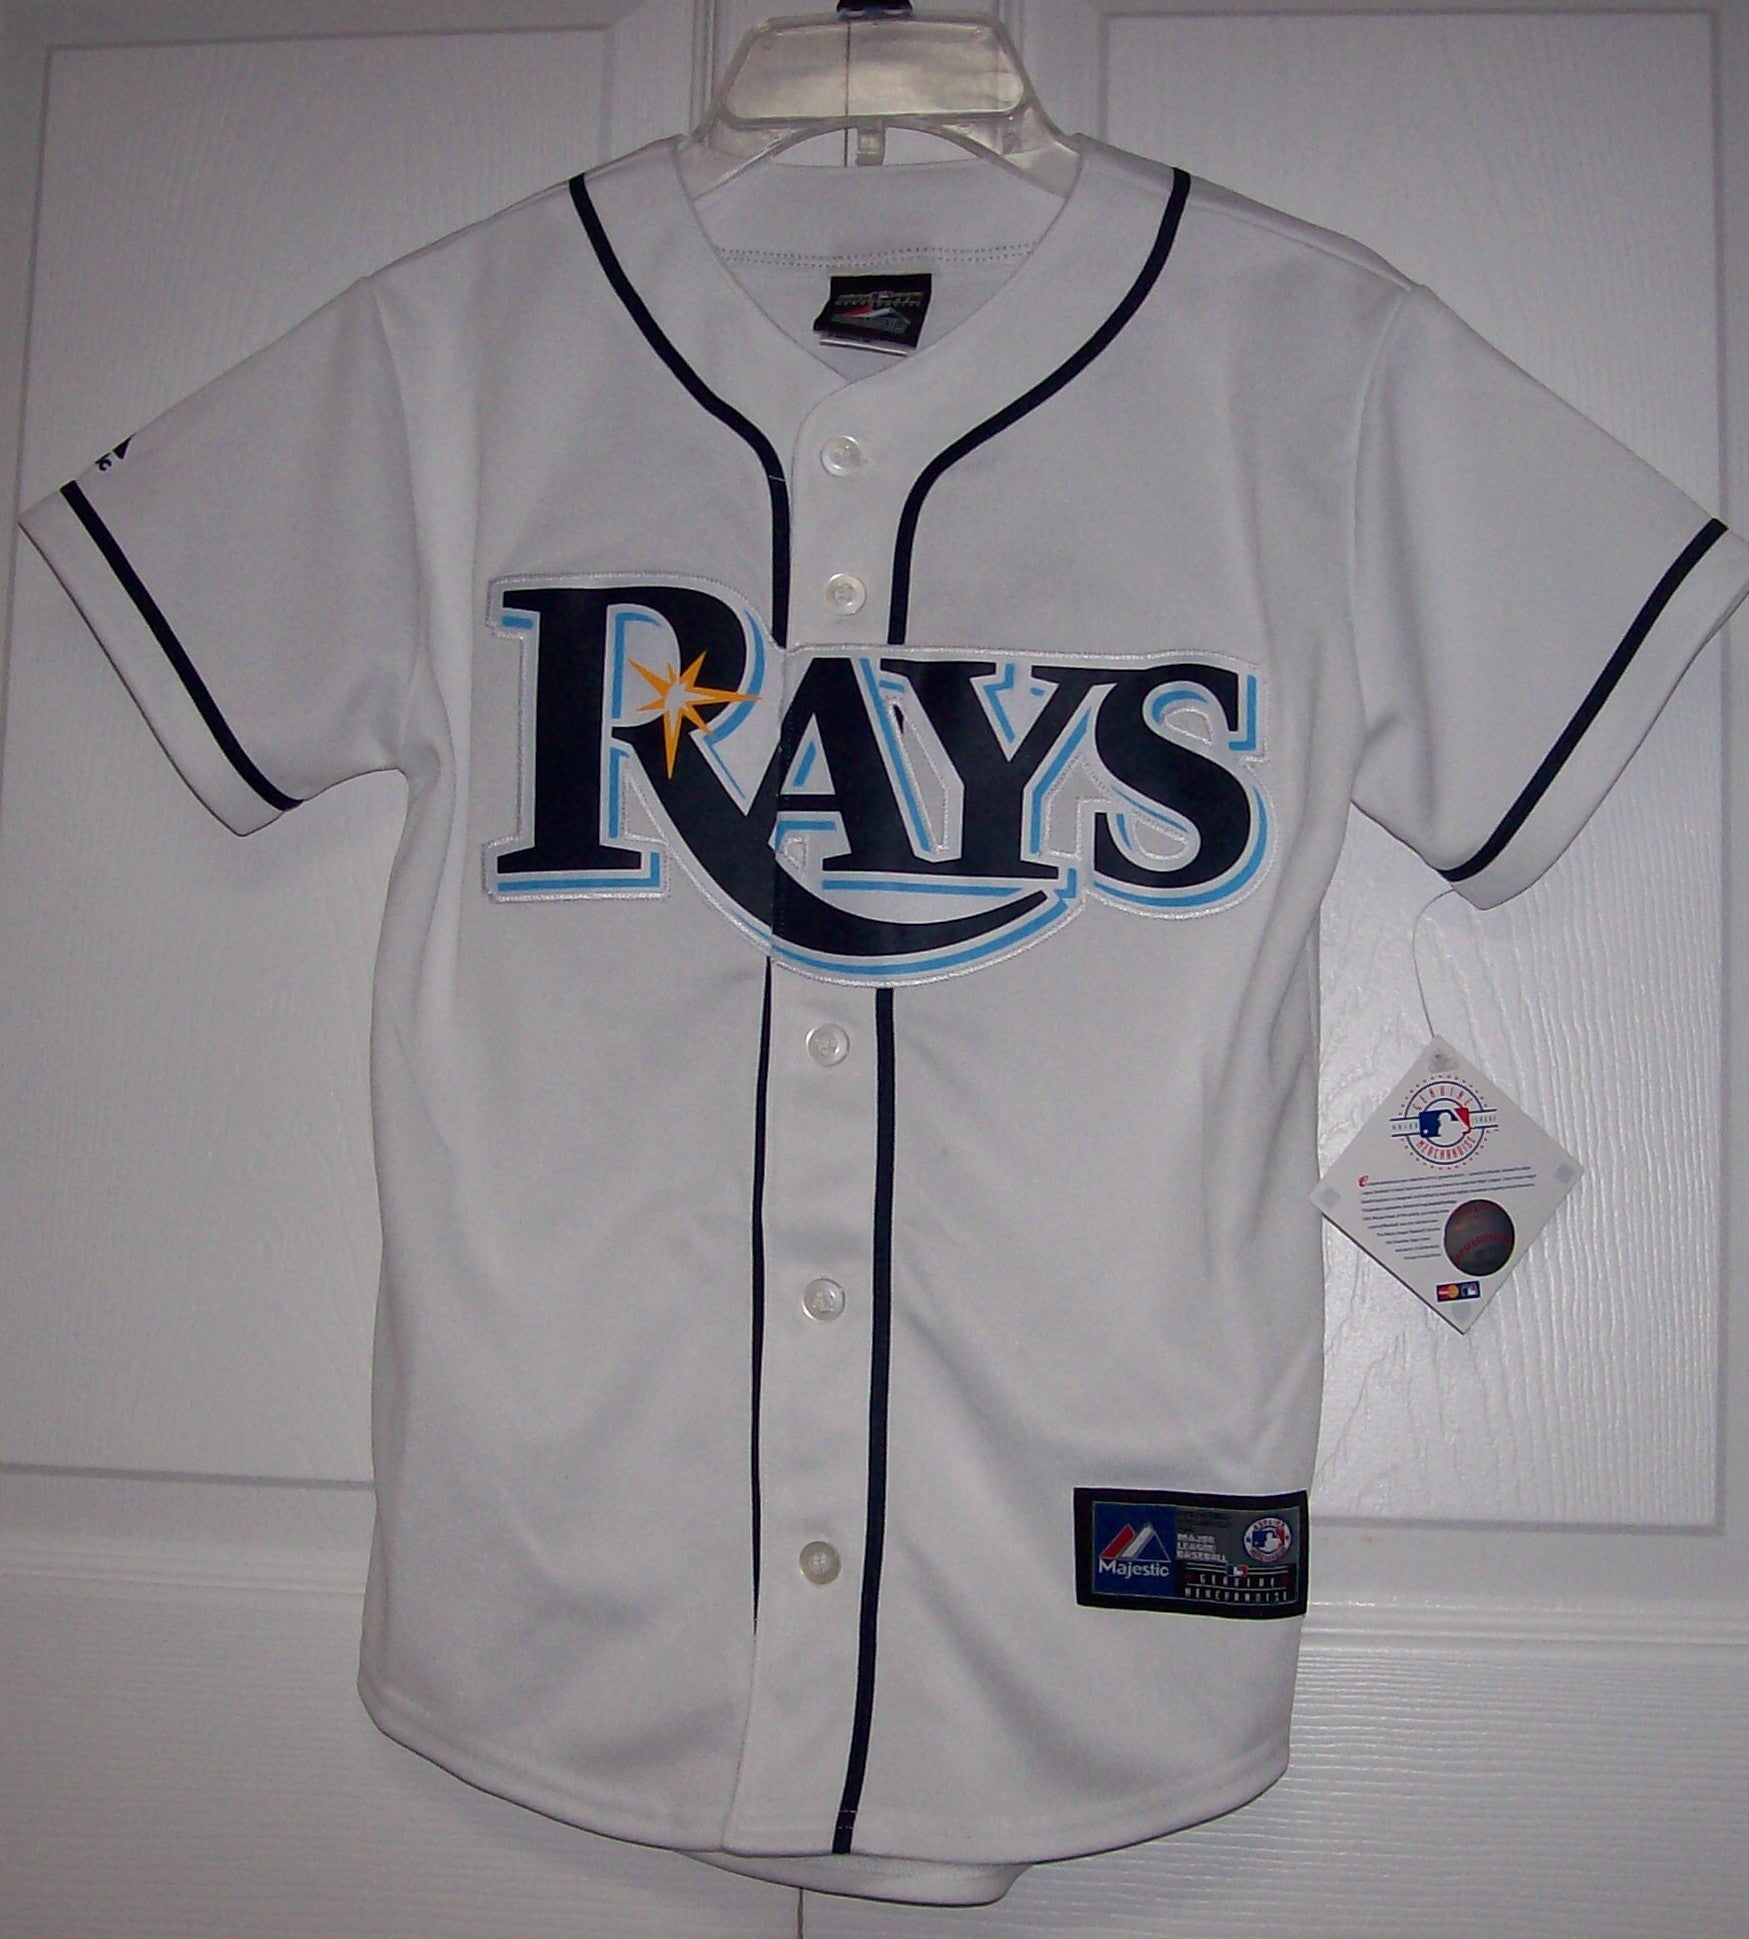 tampa bay rays home jersey